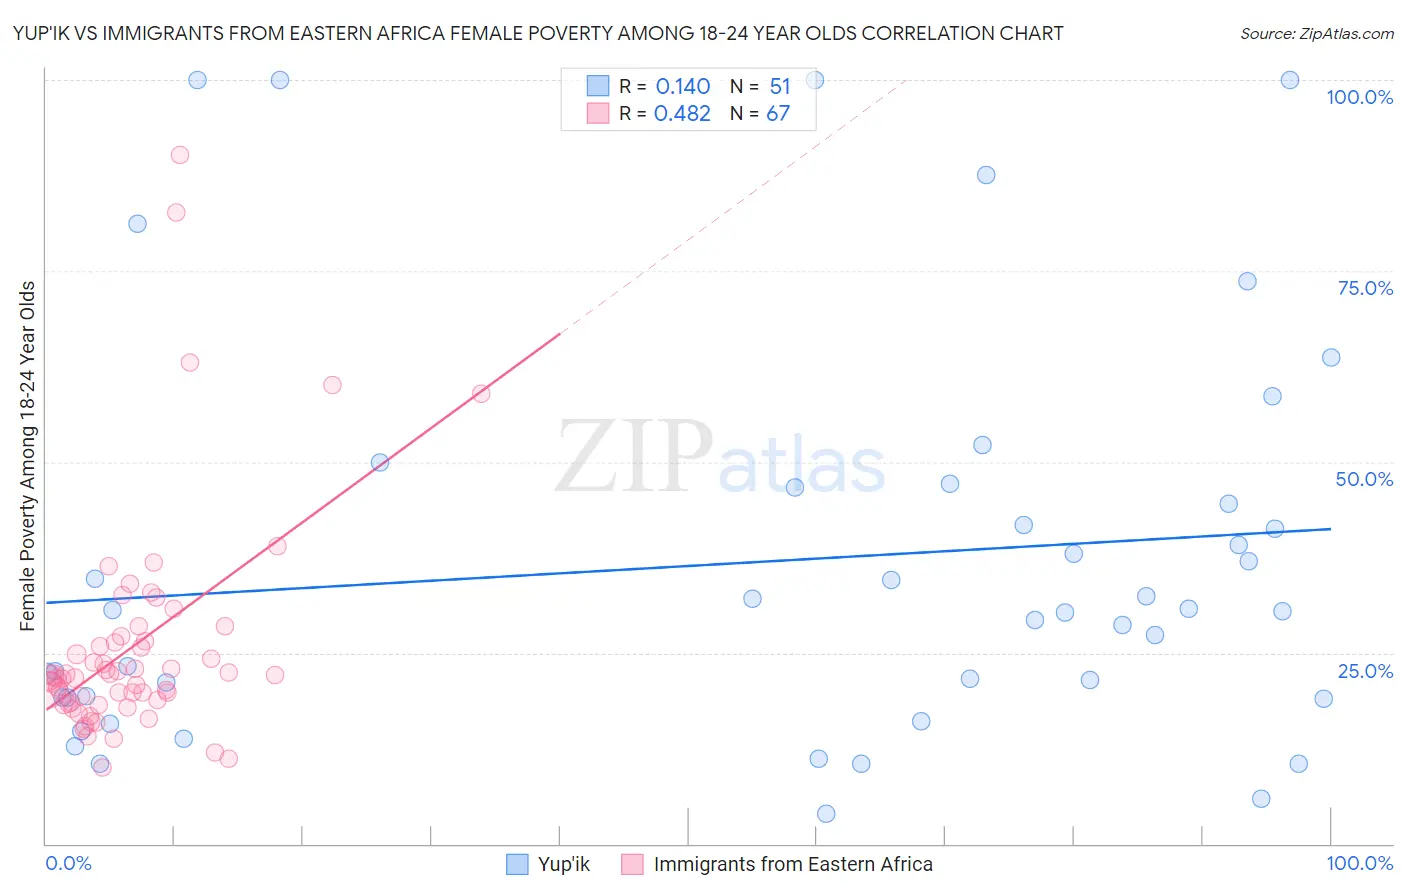 Yup'ik vs Immigrants from Eastern Africa Female Poverty Among 18-24 Year Olds